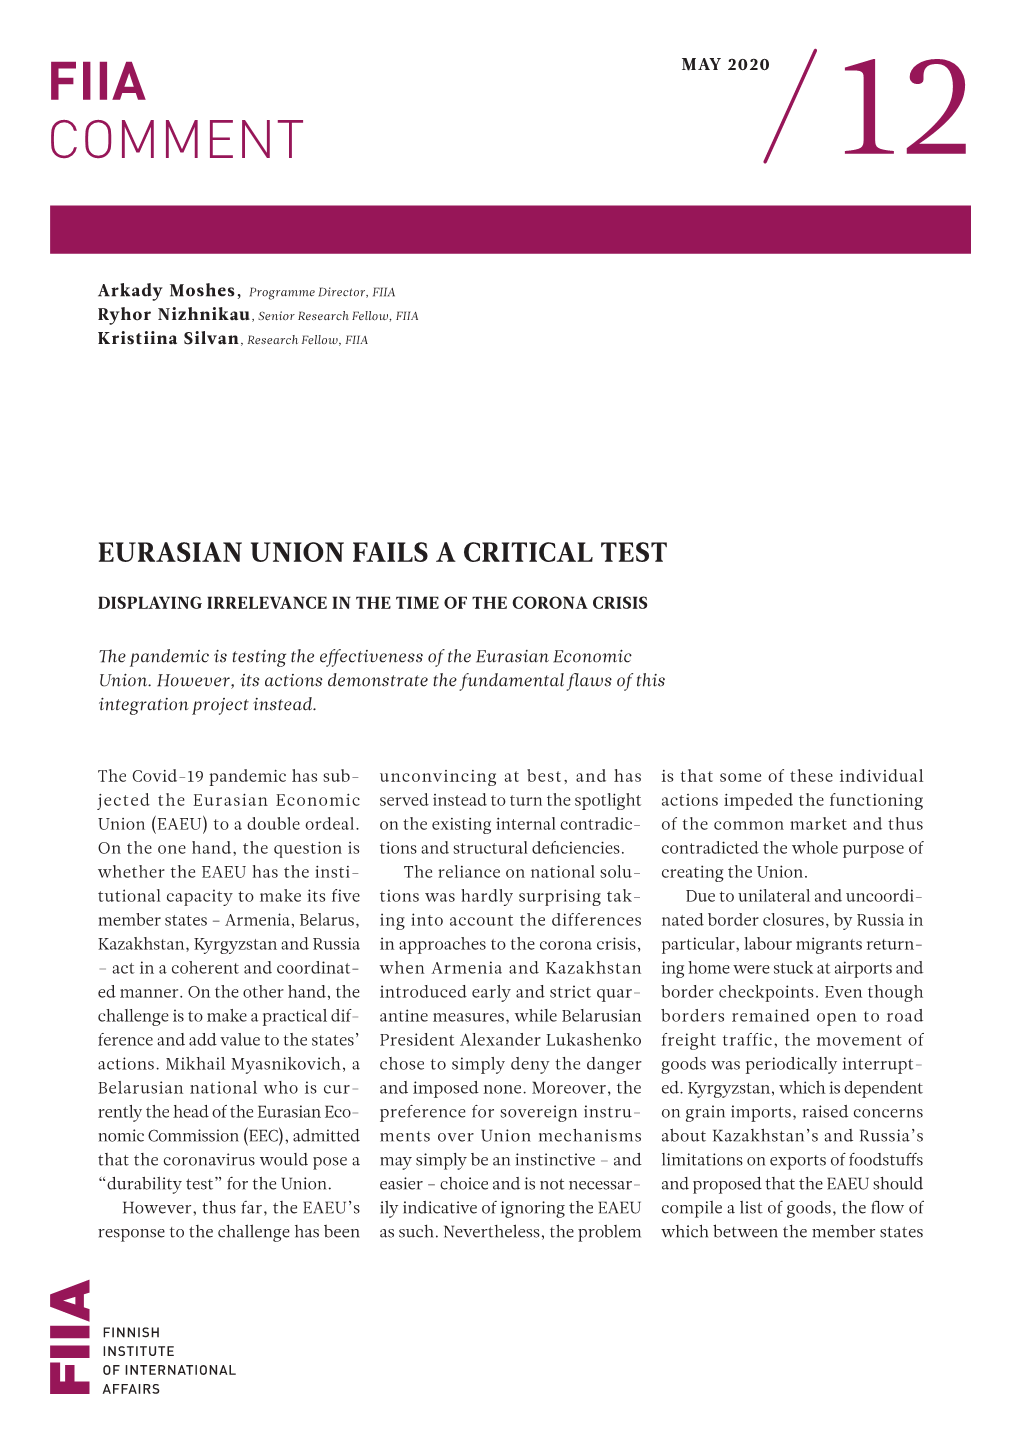 Eurasian Union Fails a Critical Test: Displaying Irrelevance in the Time Of